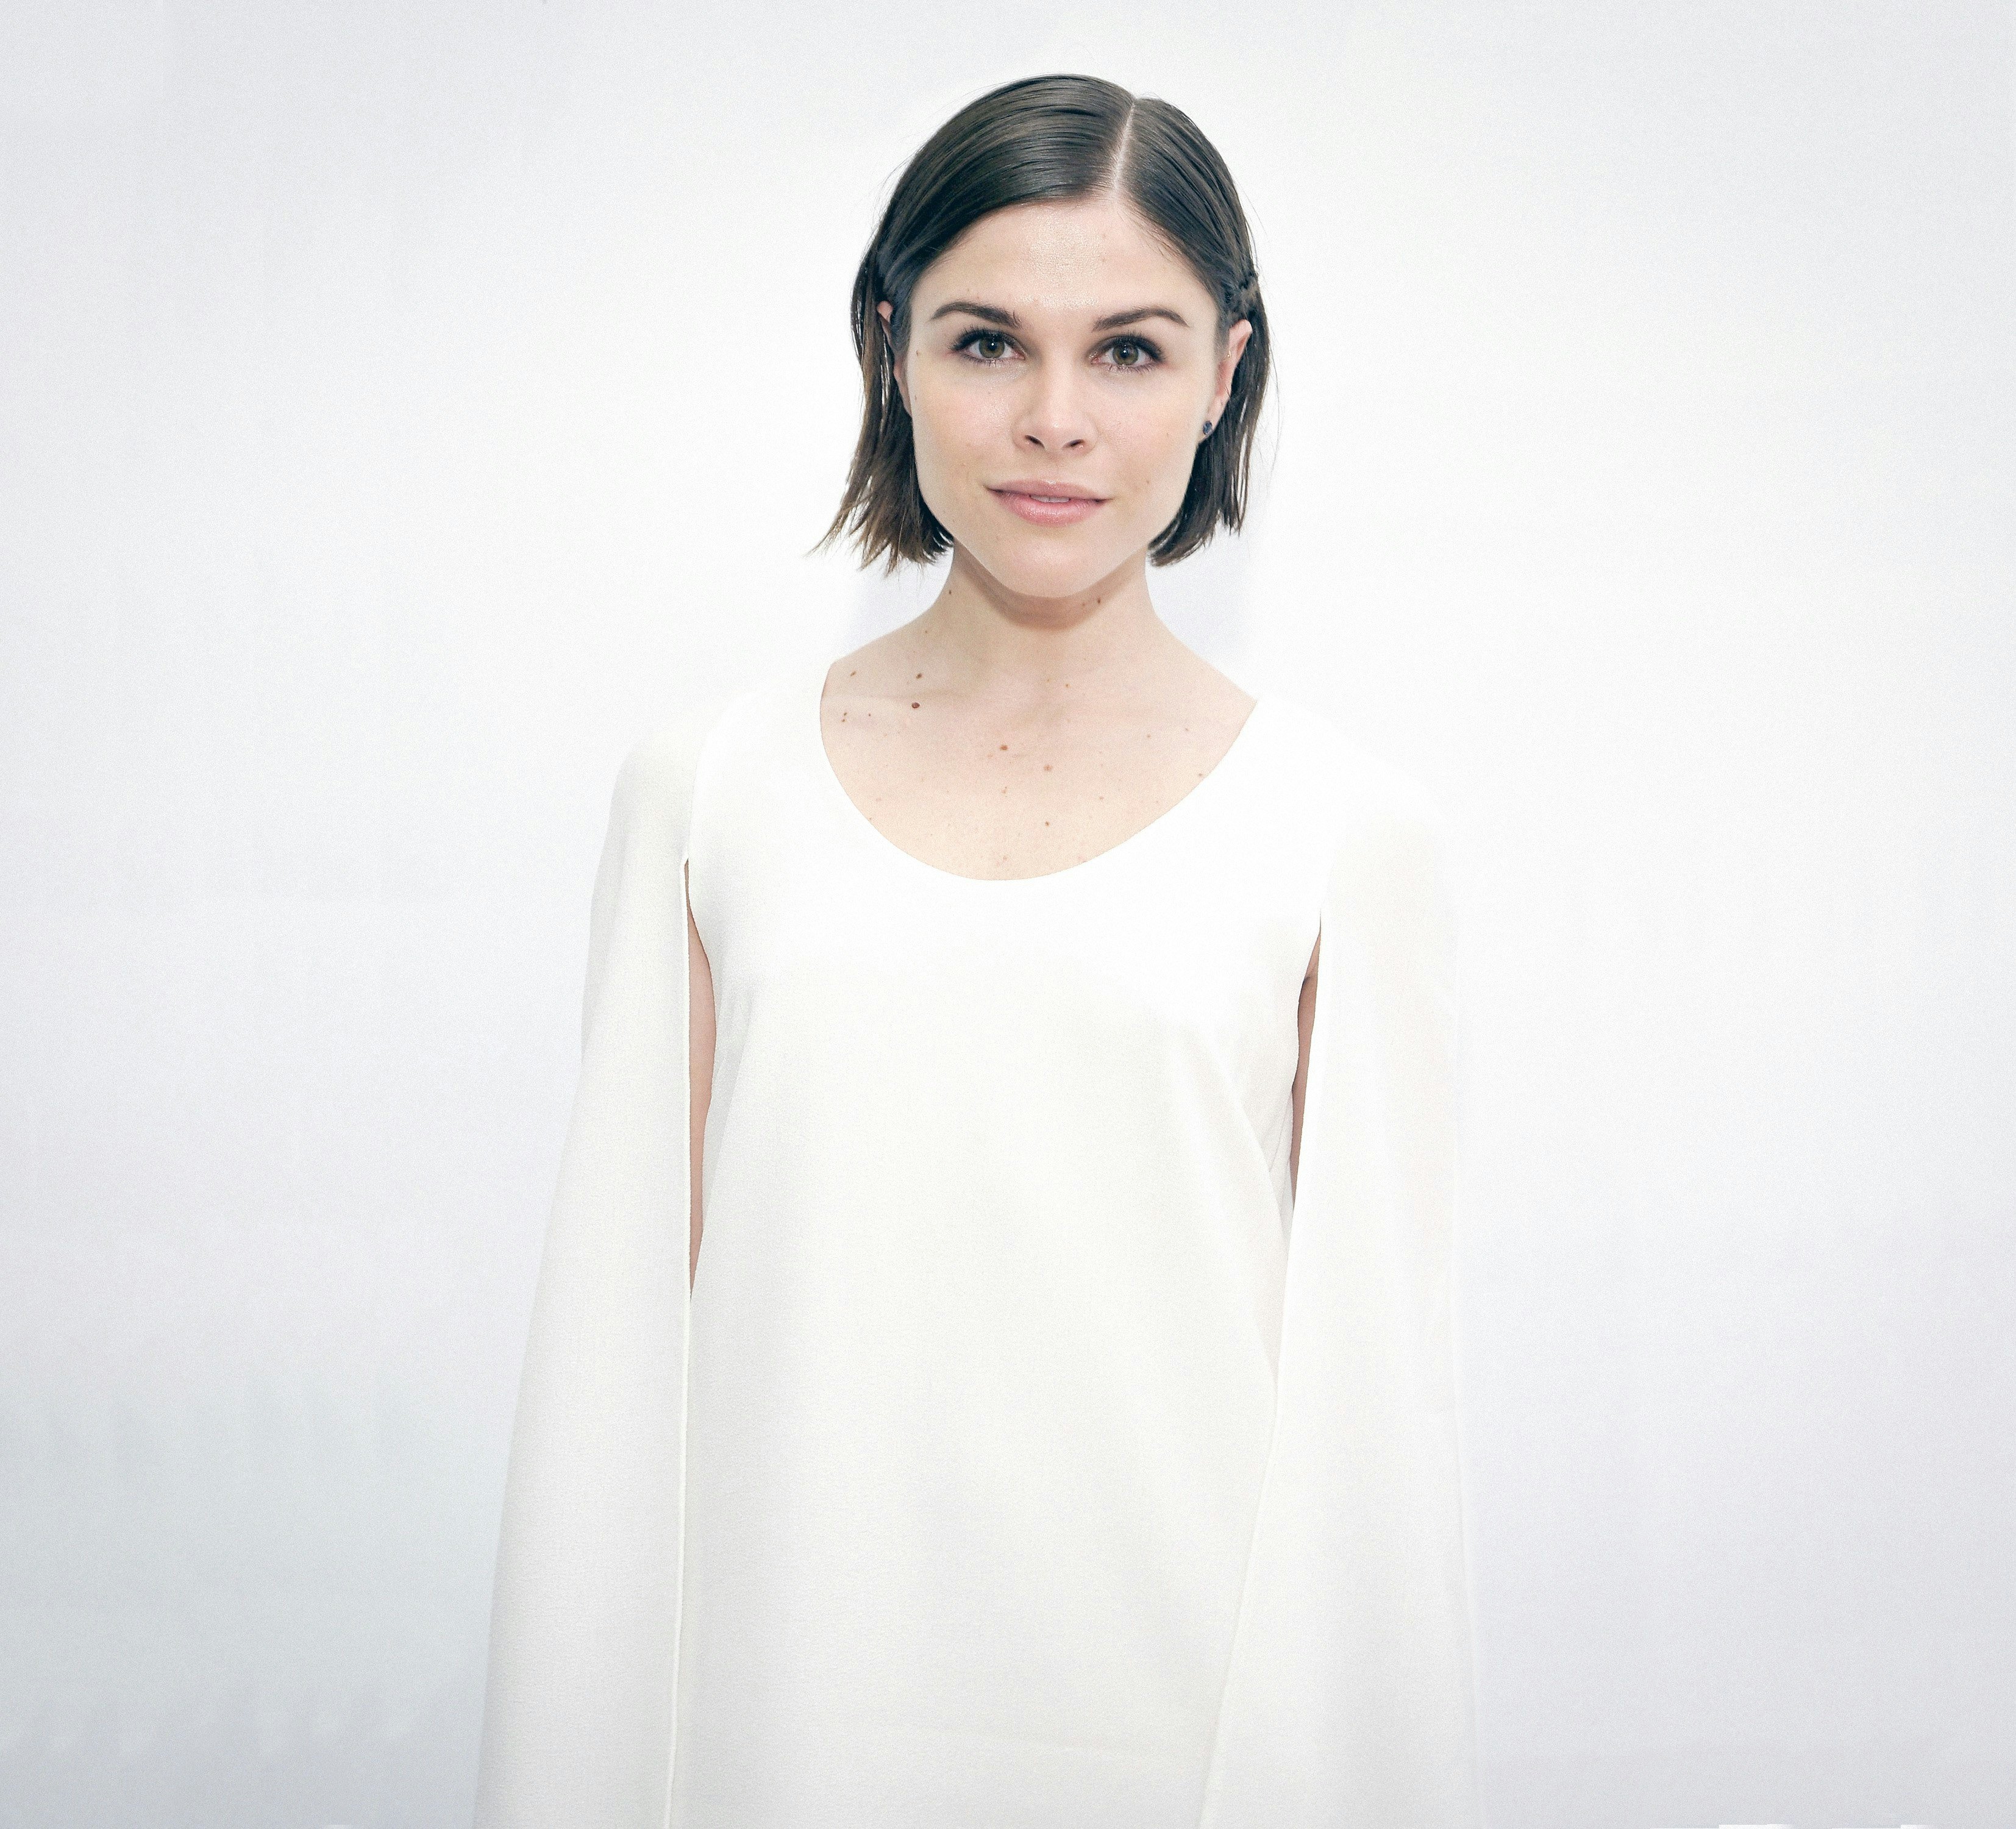 Back to Basics with Emily Weiss, the Internet Beauty Guru